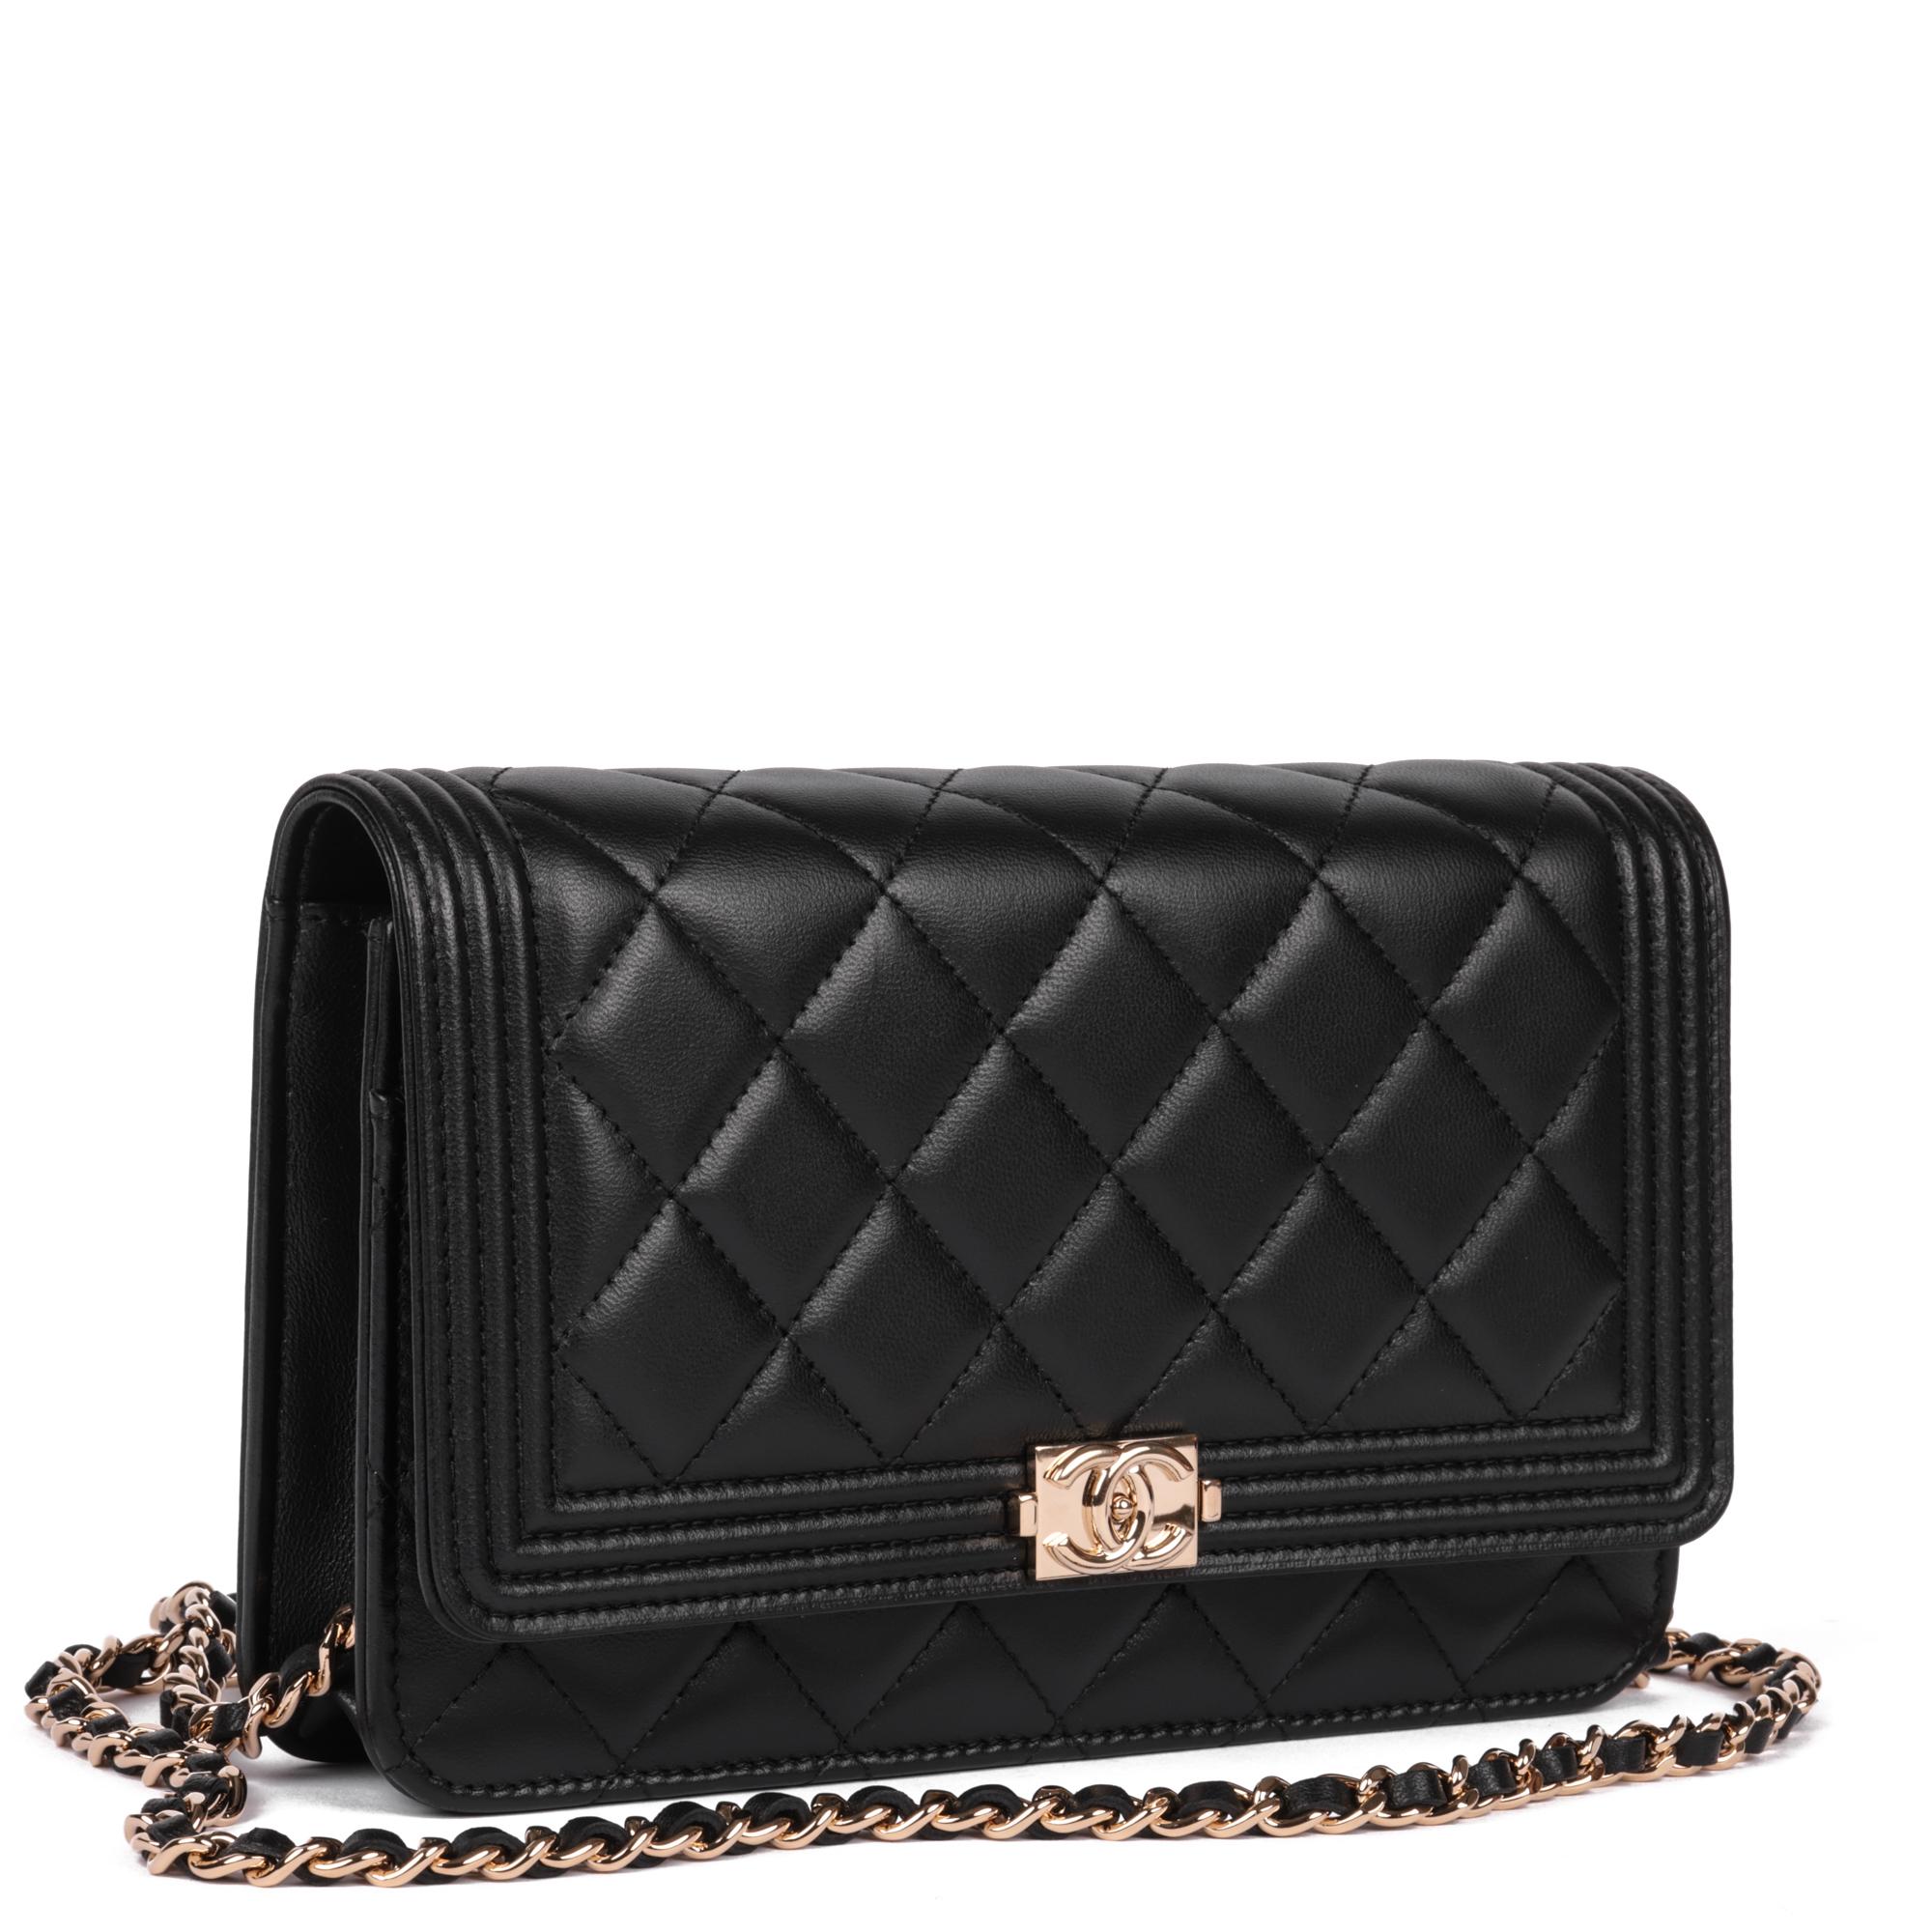 CHANEL
Black Quilted Lambskin Le Boy Wallet-on-Chain WOC

Serial Number: 21722342
Age (Circa): 2016
Accompanied By: Chanel Dust Bag, Authenticity Card, Protective Felt
Authenticity Details:  Authenticity Card, Serial Sticker (Made in Italy)
Gender: